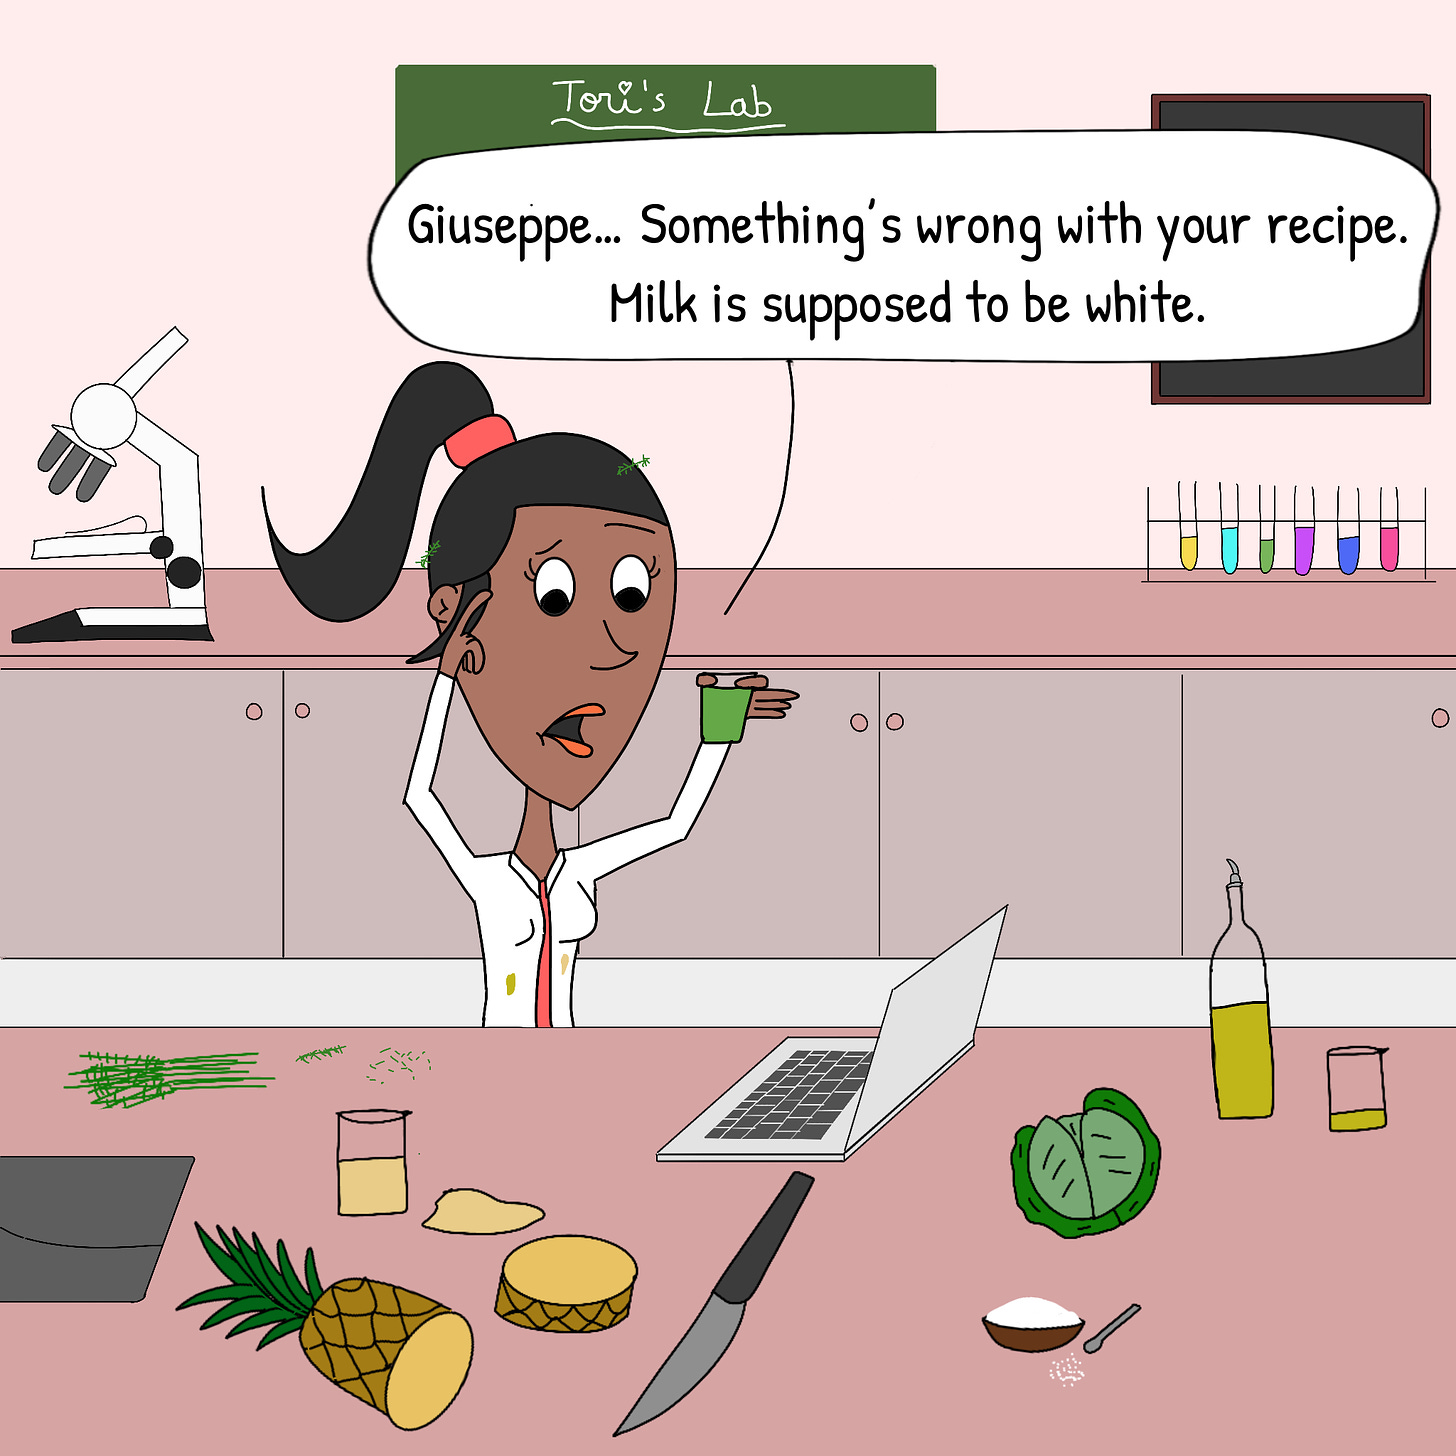 Panel 5: Tori has tried to follow Giuseppe's recipe and used all the right ingredients. Somehow, she ended up with green milk. Tori looks confused and tells Giuseppe: "Giuseppe... Something's wrong with your recipe. Milk is supposed to be white."